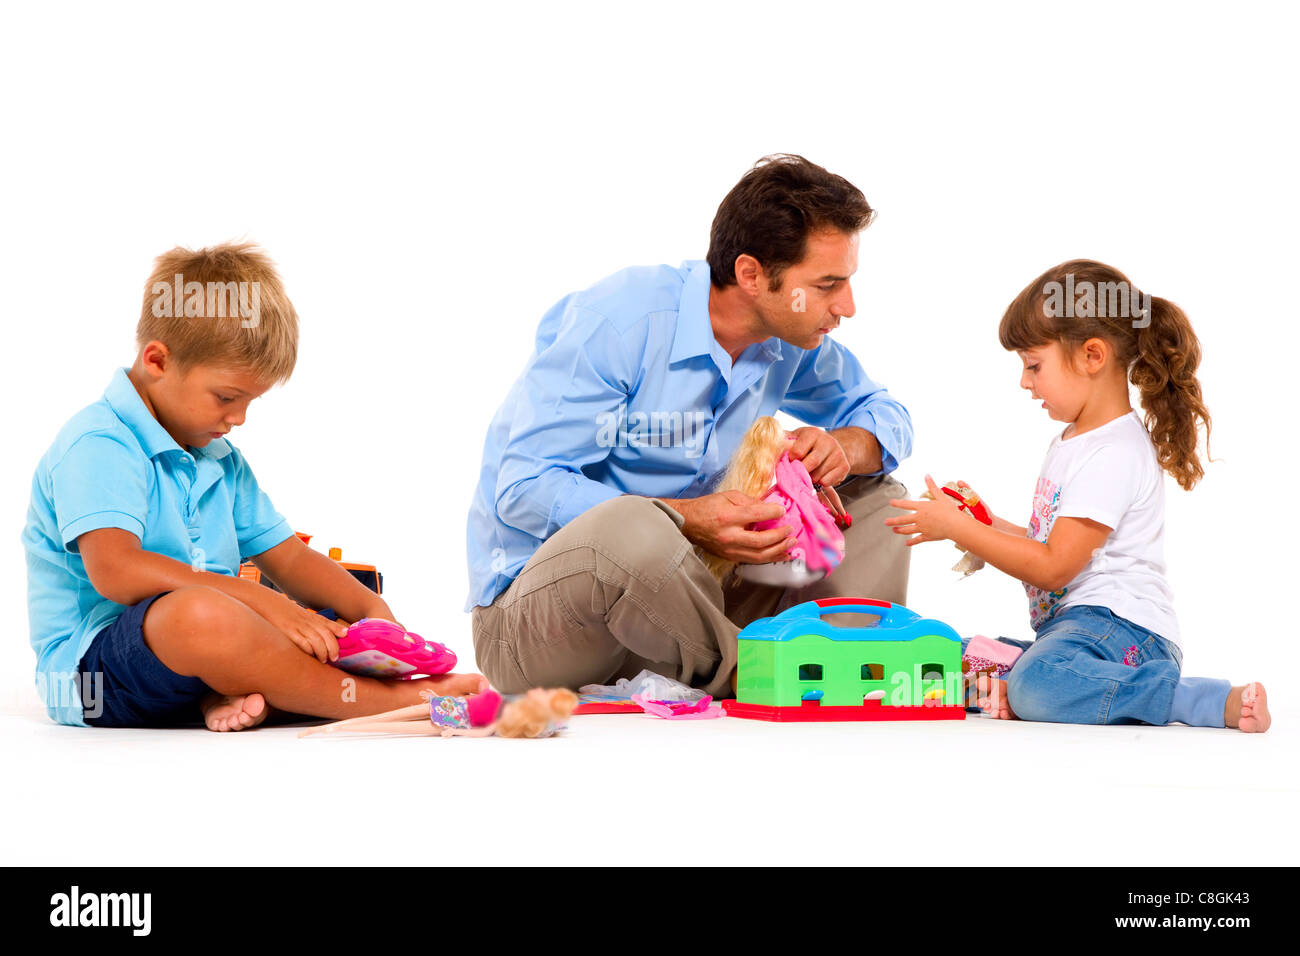 father playing with children Stock Photo